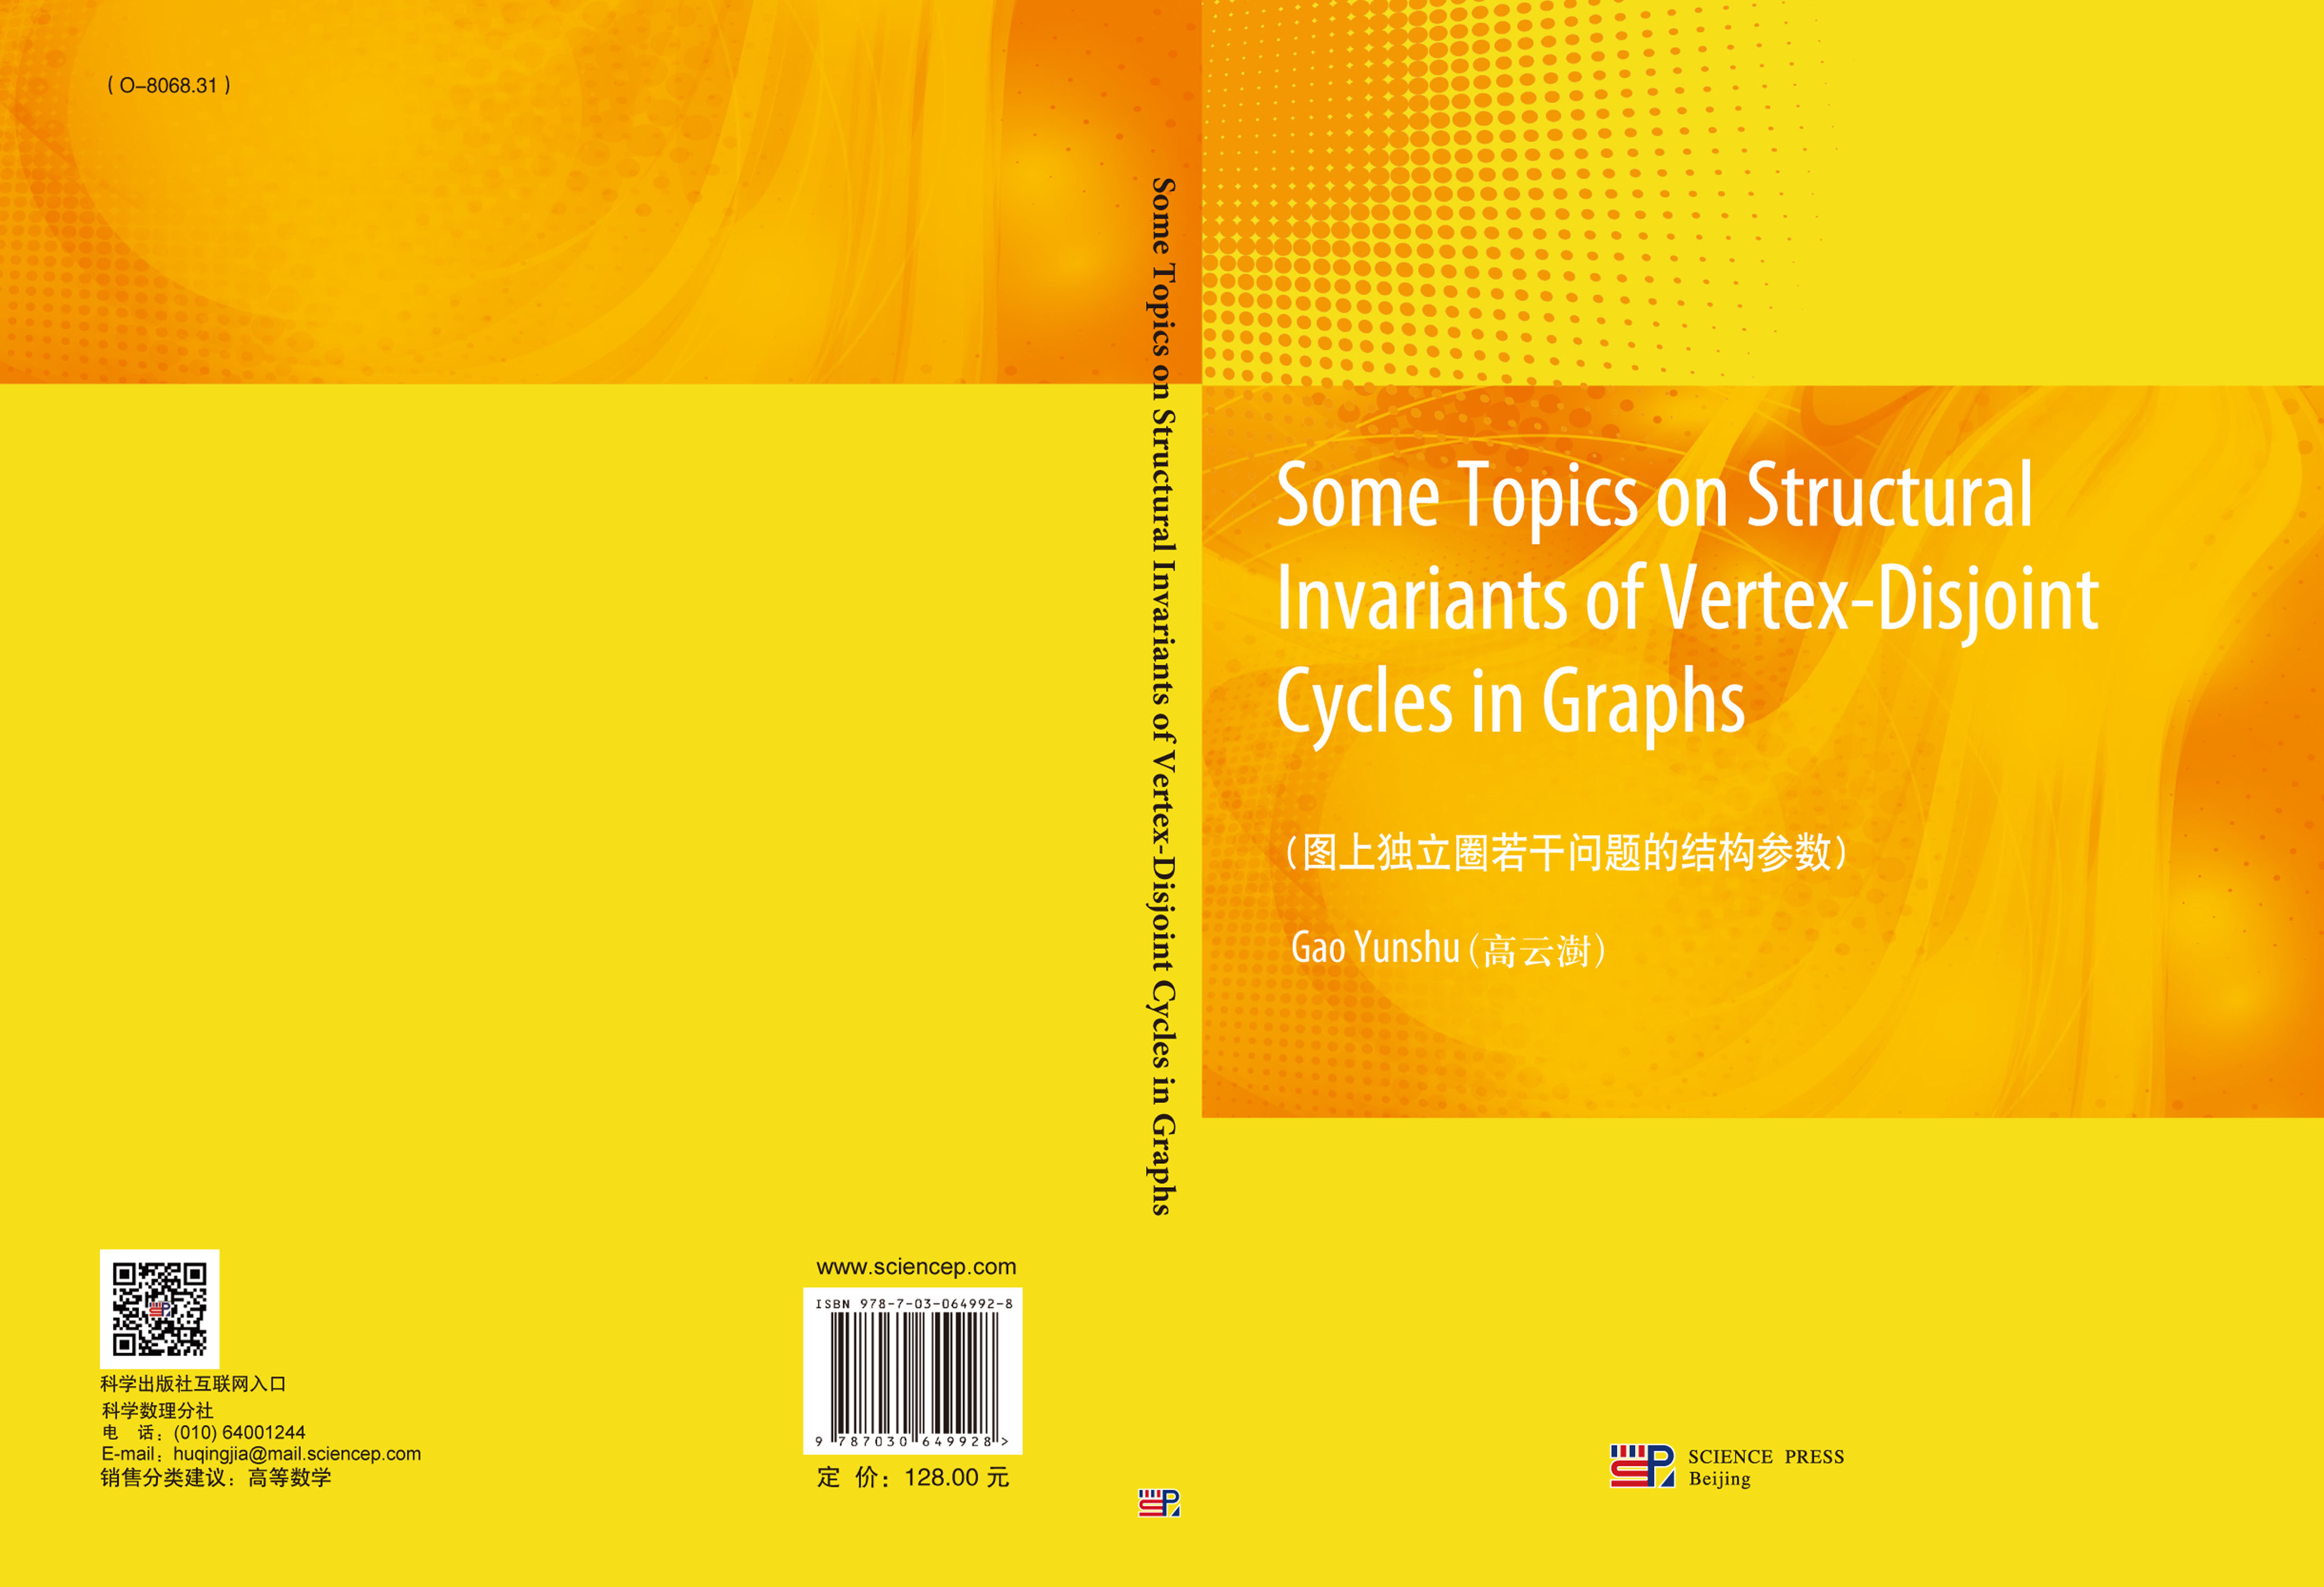 Some Topics on Structural Invariants of Vertex-Disjoint Cycles in Graphs